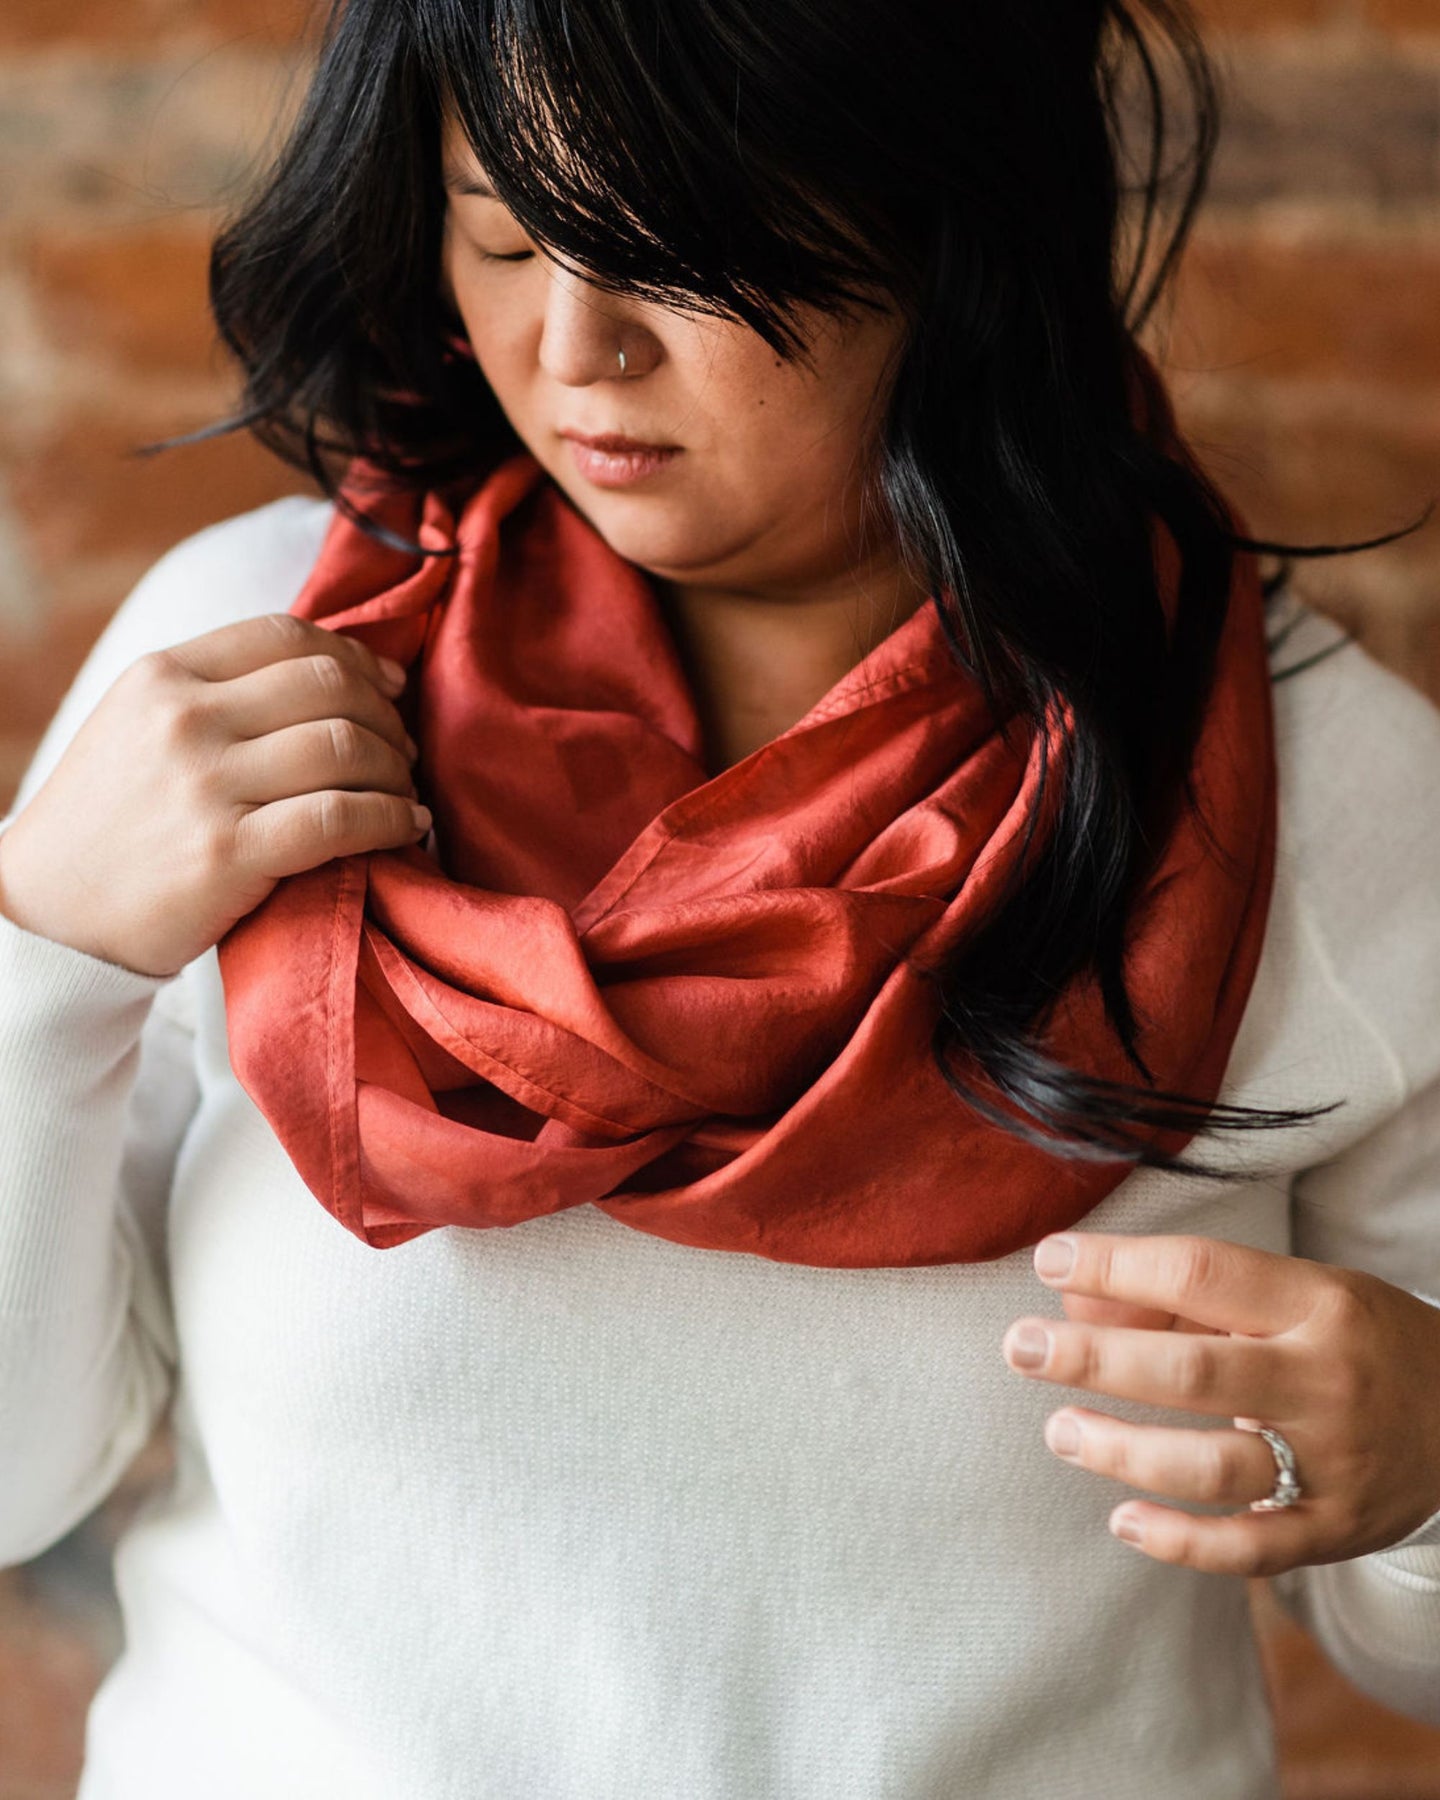 Asian woman wearing a cozy white sweater looking down and arranging russet red silk infinity scarf around her neck, wavy black hair falling over her shoulder and bangs sweeping low across her forehead